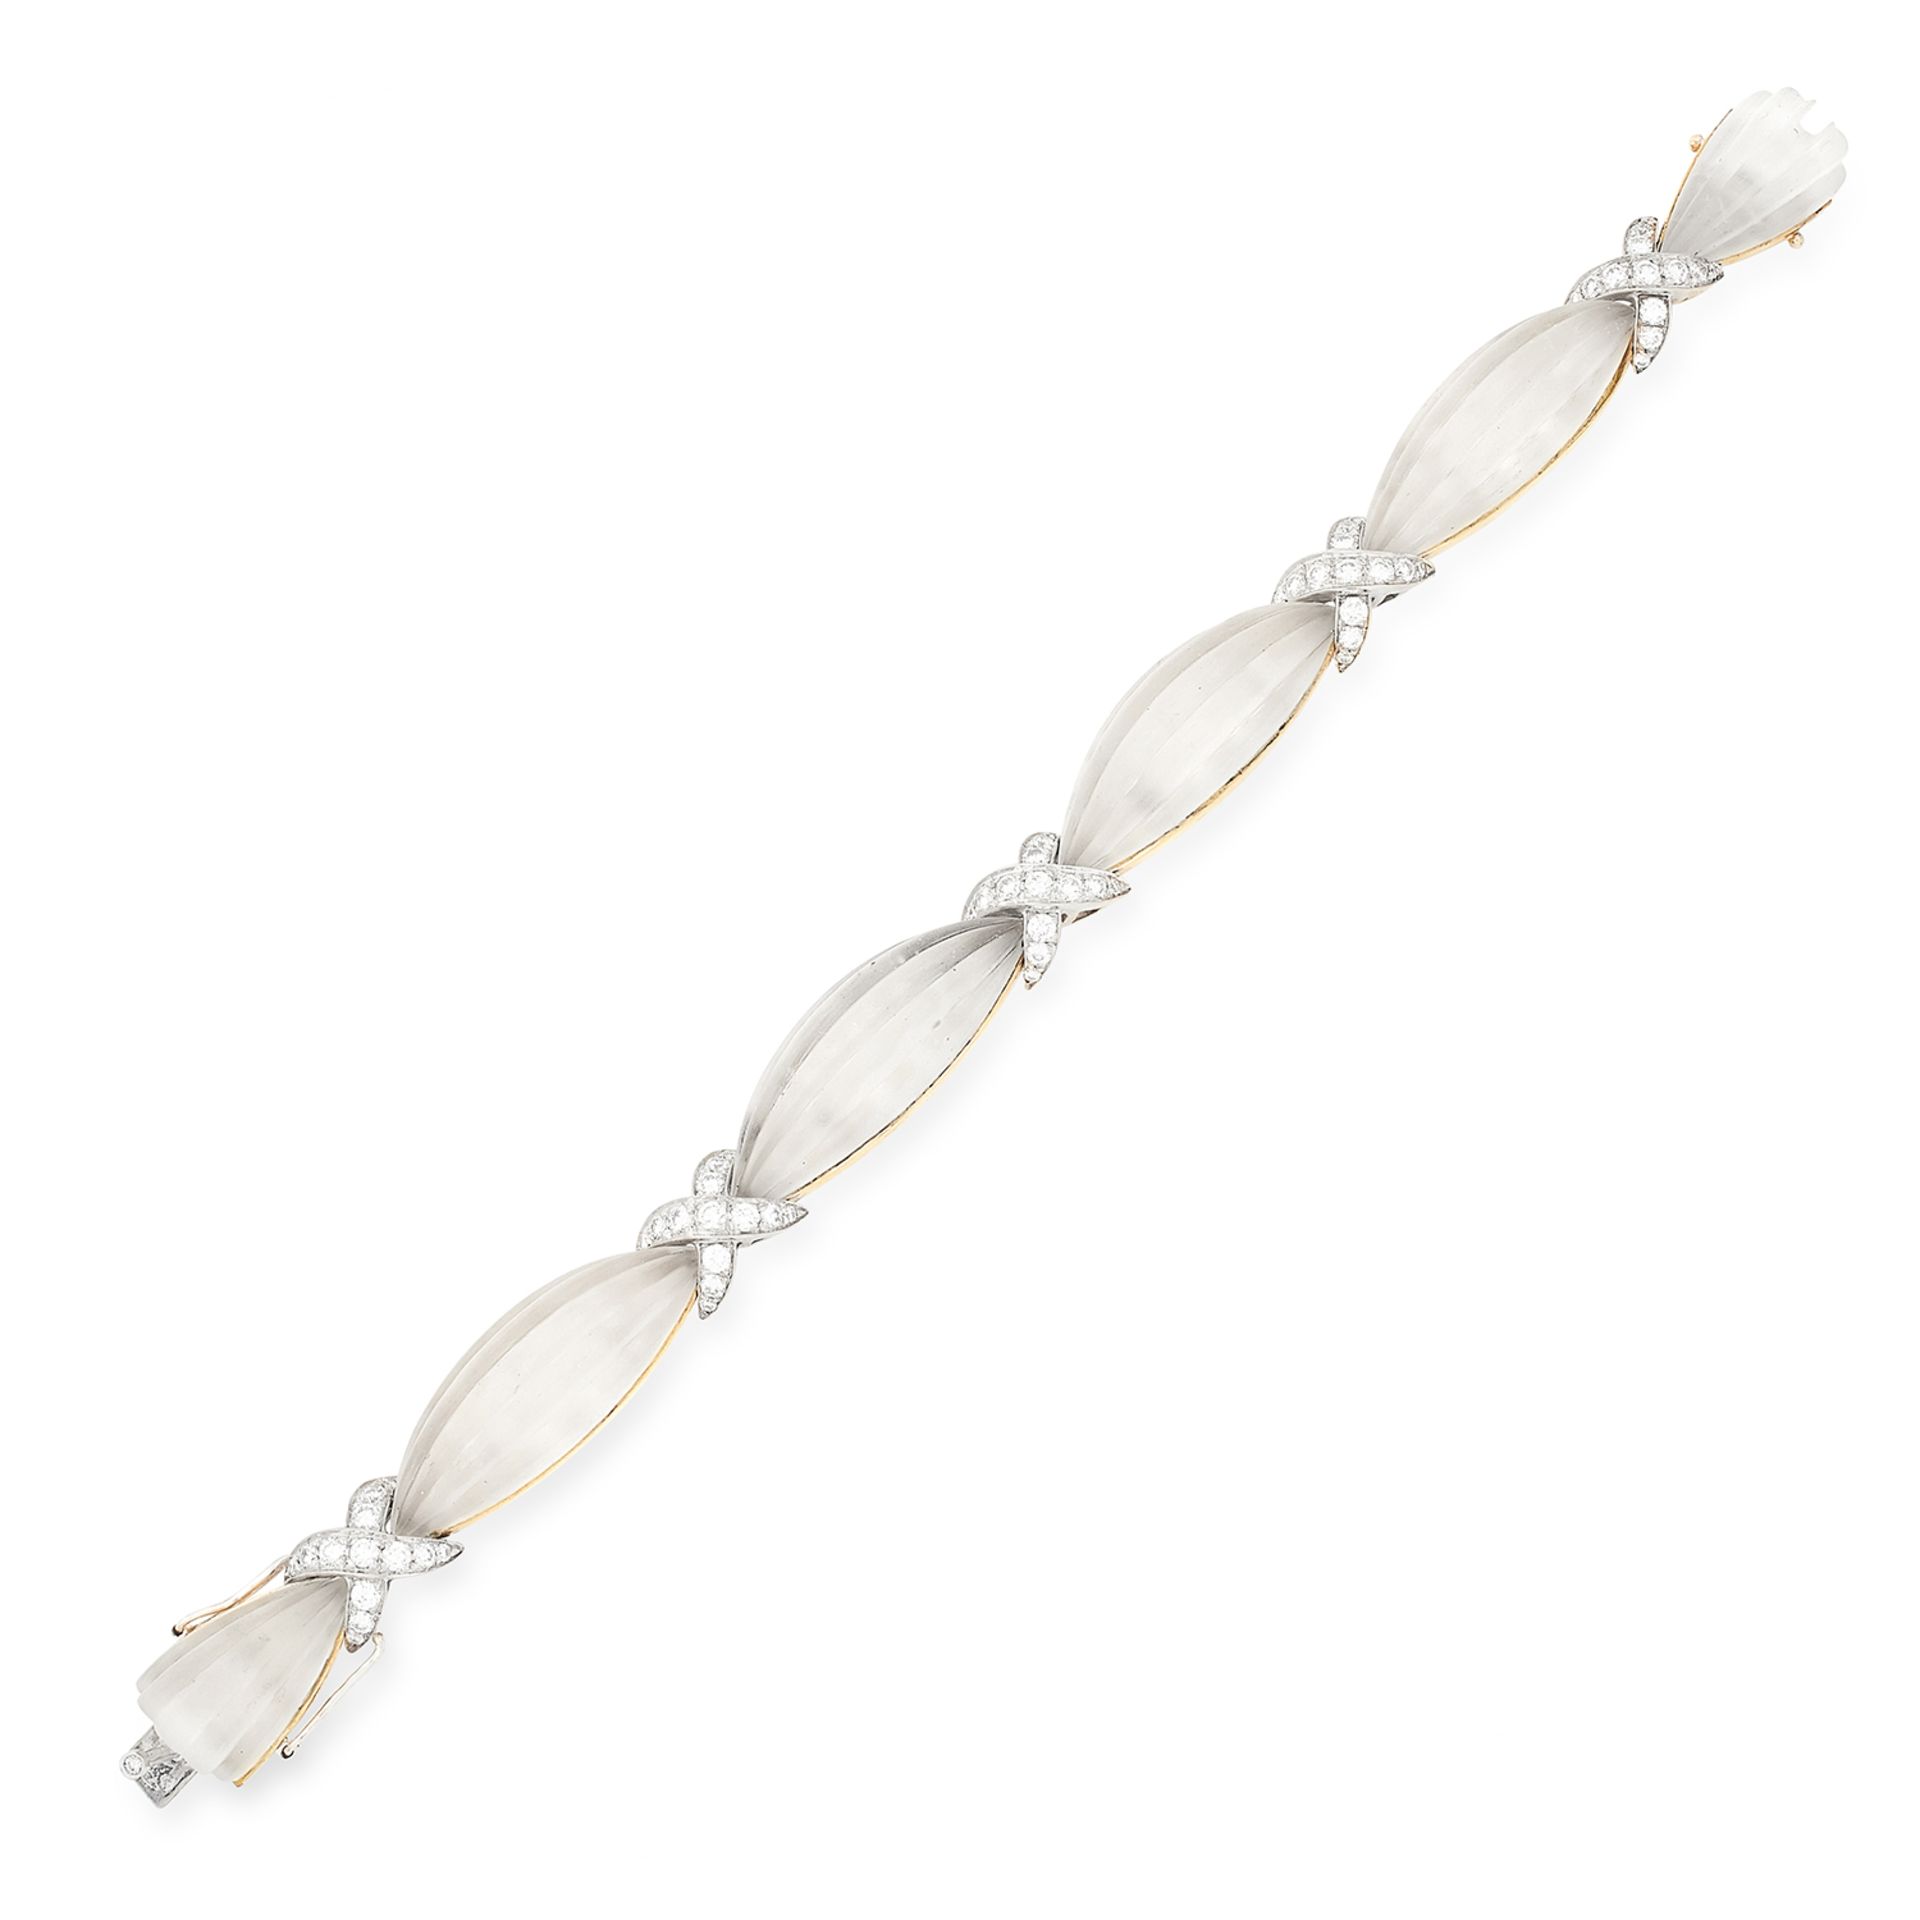 CARVED ROCK CRYSTAL AND DIAMOND BRACELET, set with approximately 2.00 carats of round cut